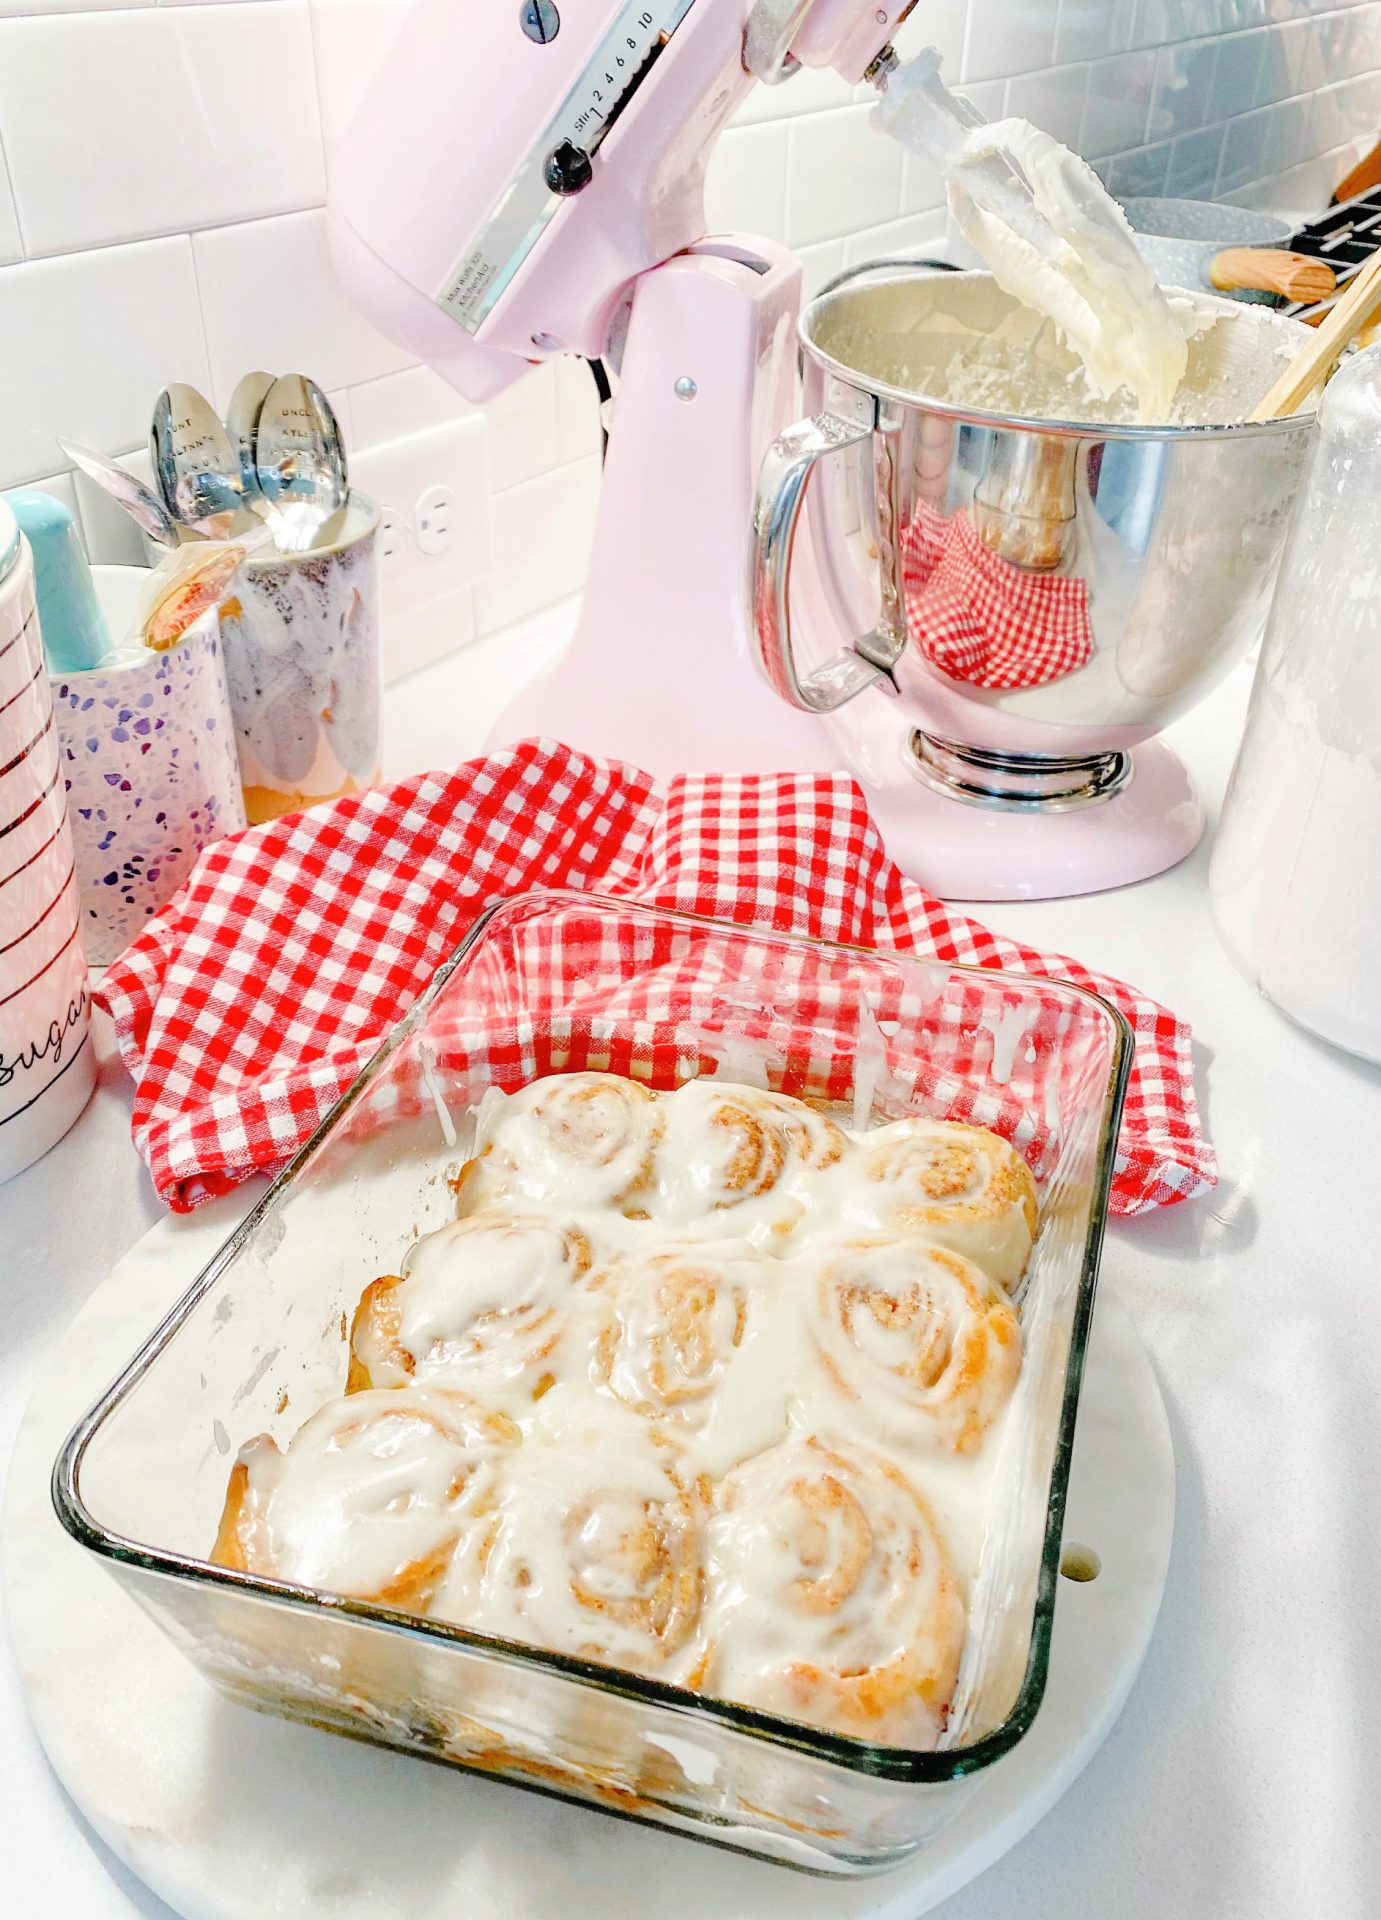 the best cinnamon rolls you'll ever eat, easy to make cinnamon rolls, cinnamon rolls, baking, baked cinnamon rolls, cinnamon rolls from scratch, homemade cinnamon buns, frosting, vanilla frosting, cinnamon rolls, frosted cinnamon rolls, 